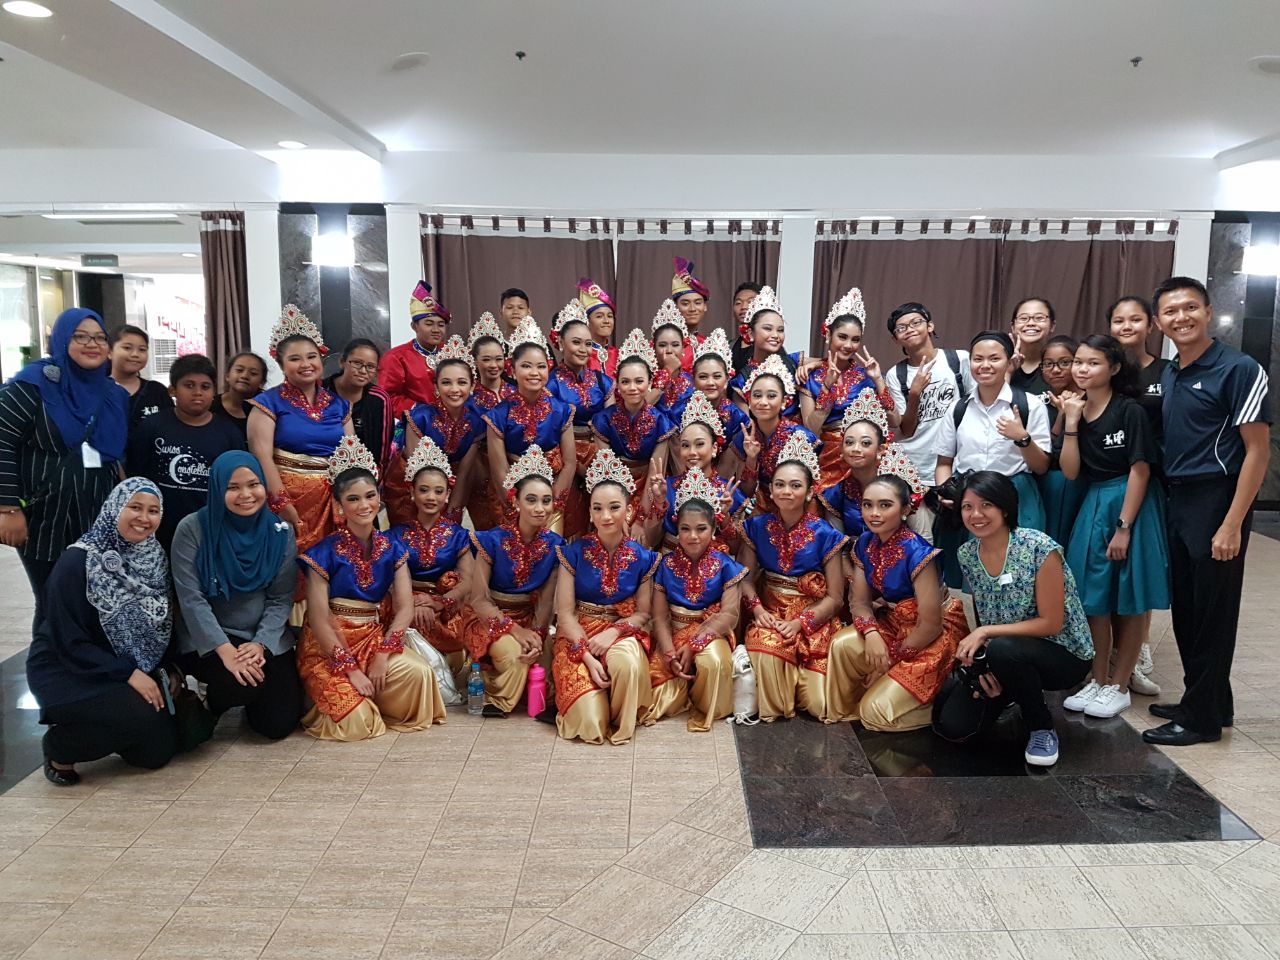 leow su qi with her malay dance group posing for a photo